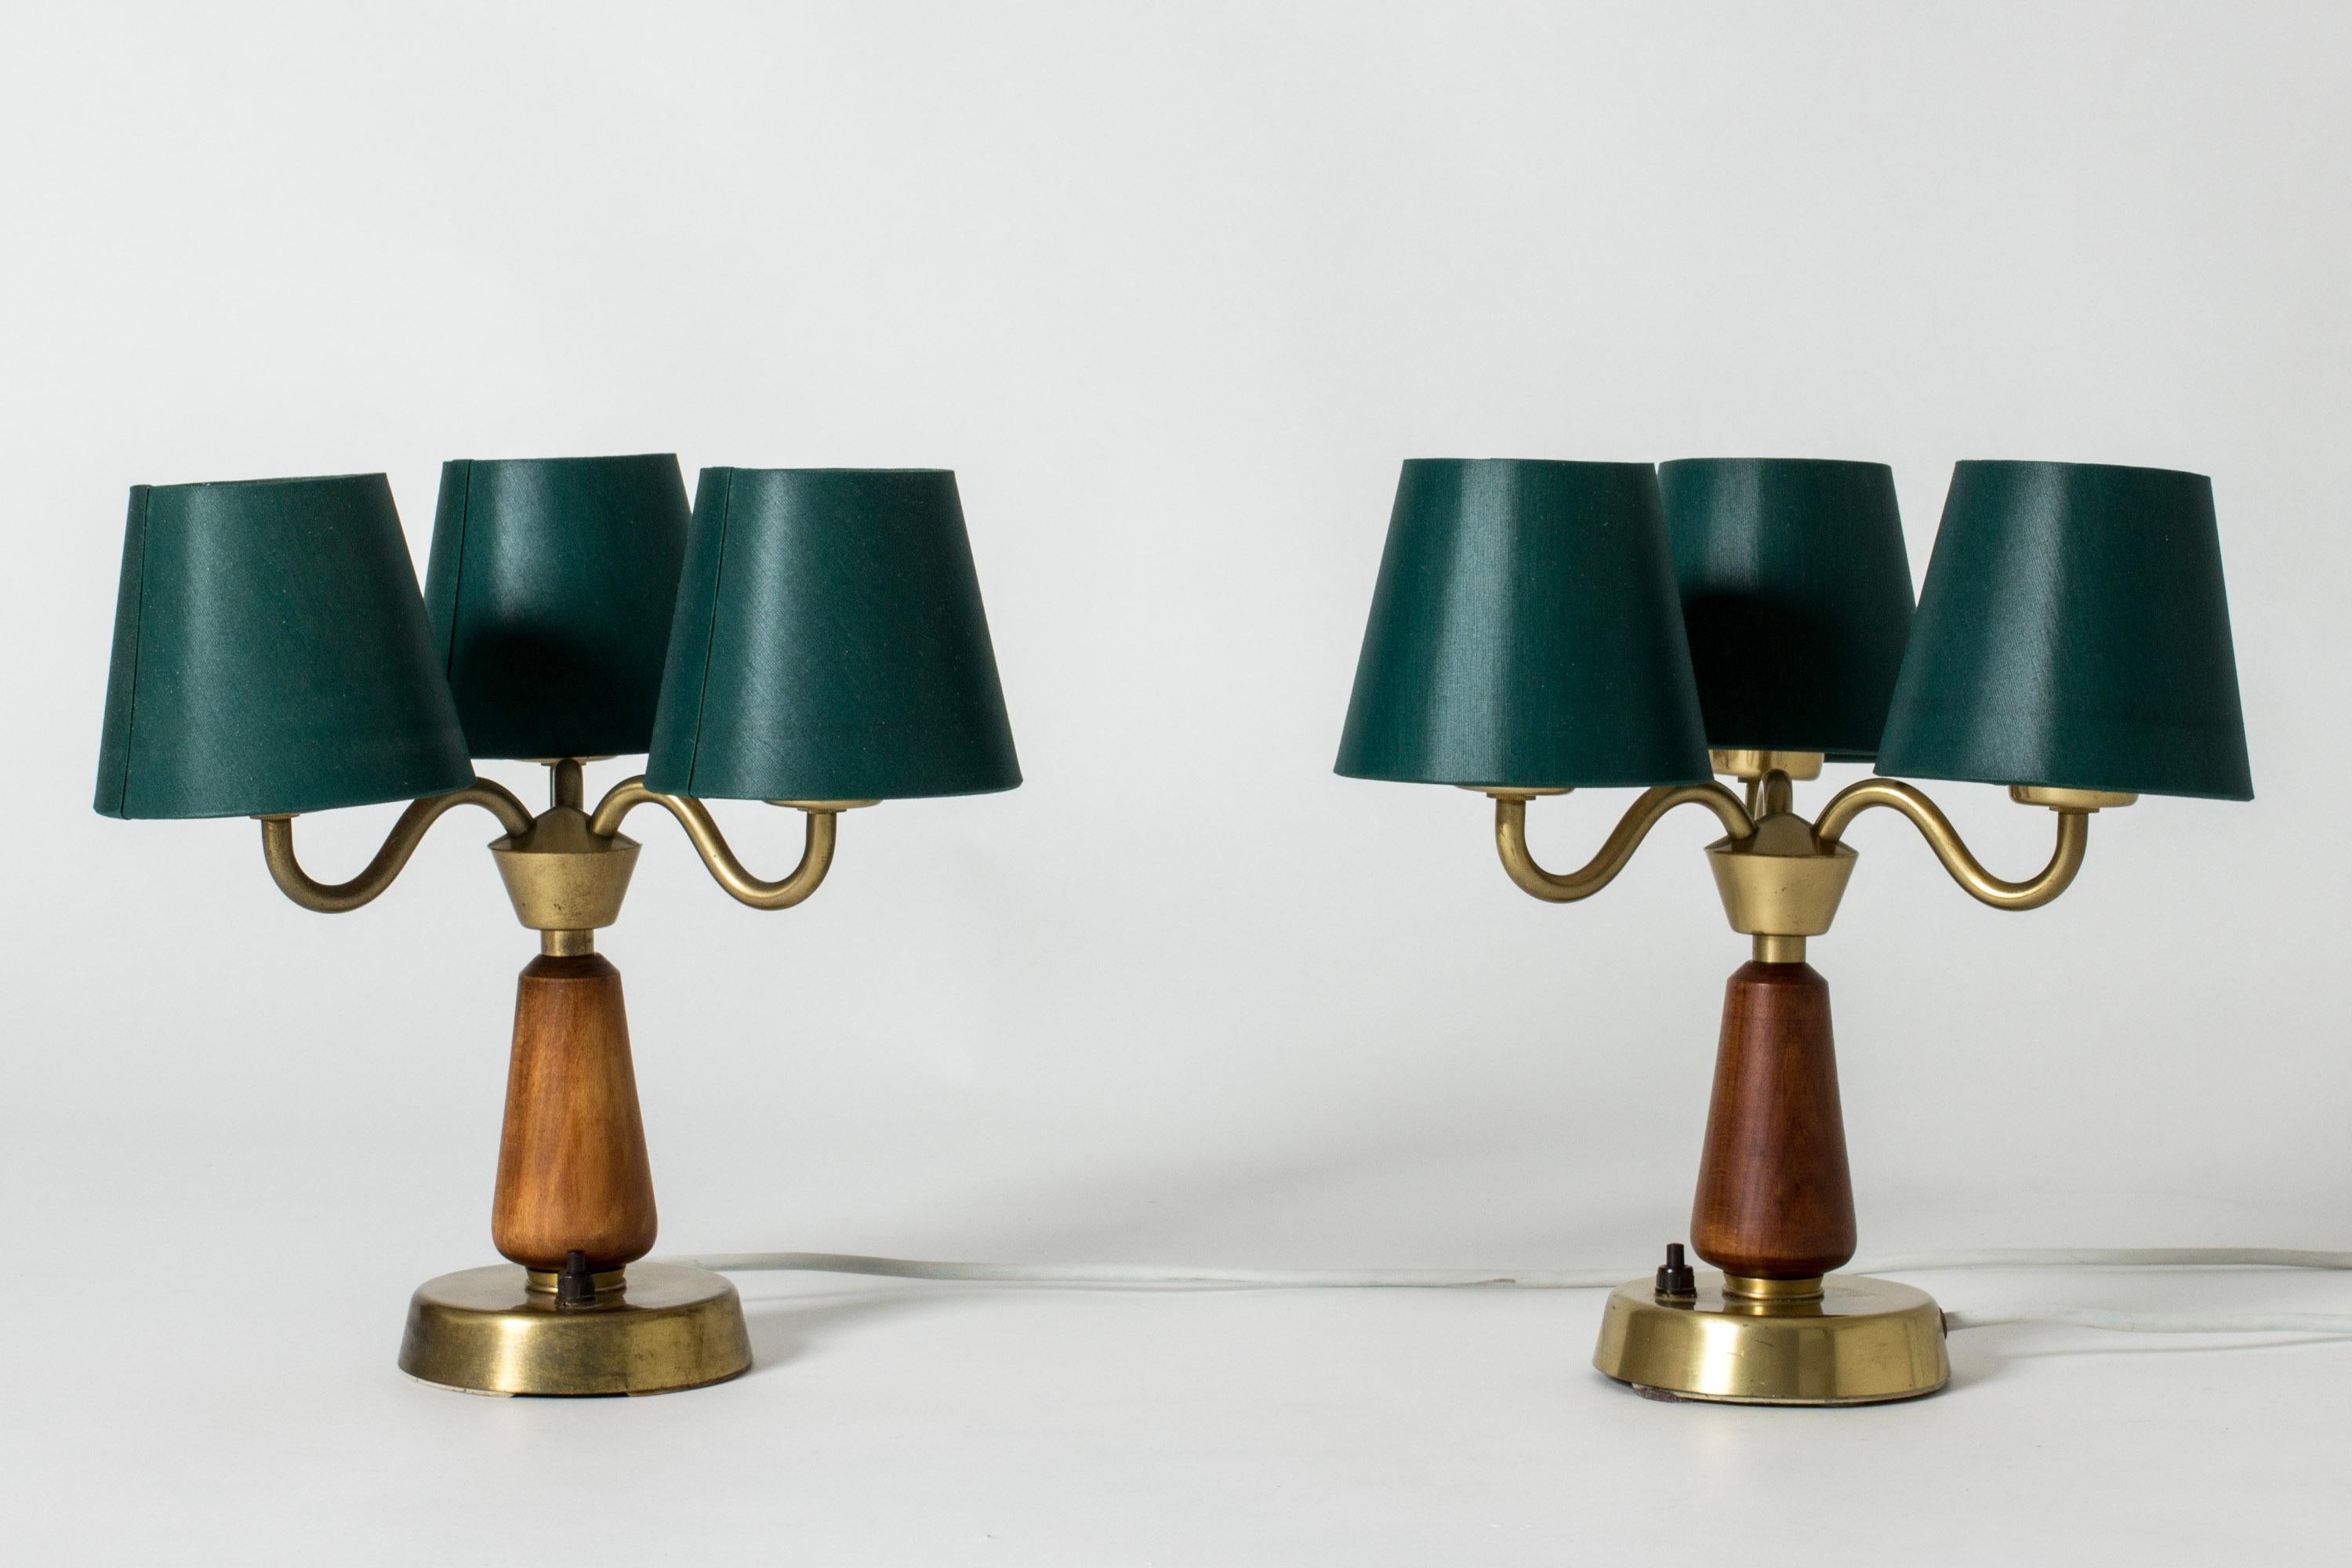 Pair of brass and mahogany table lamps from ASEA, in a compact design with three shades on each. Lovely curved forms.